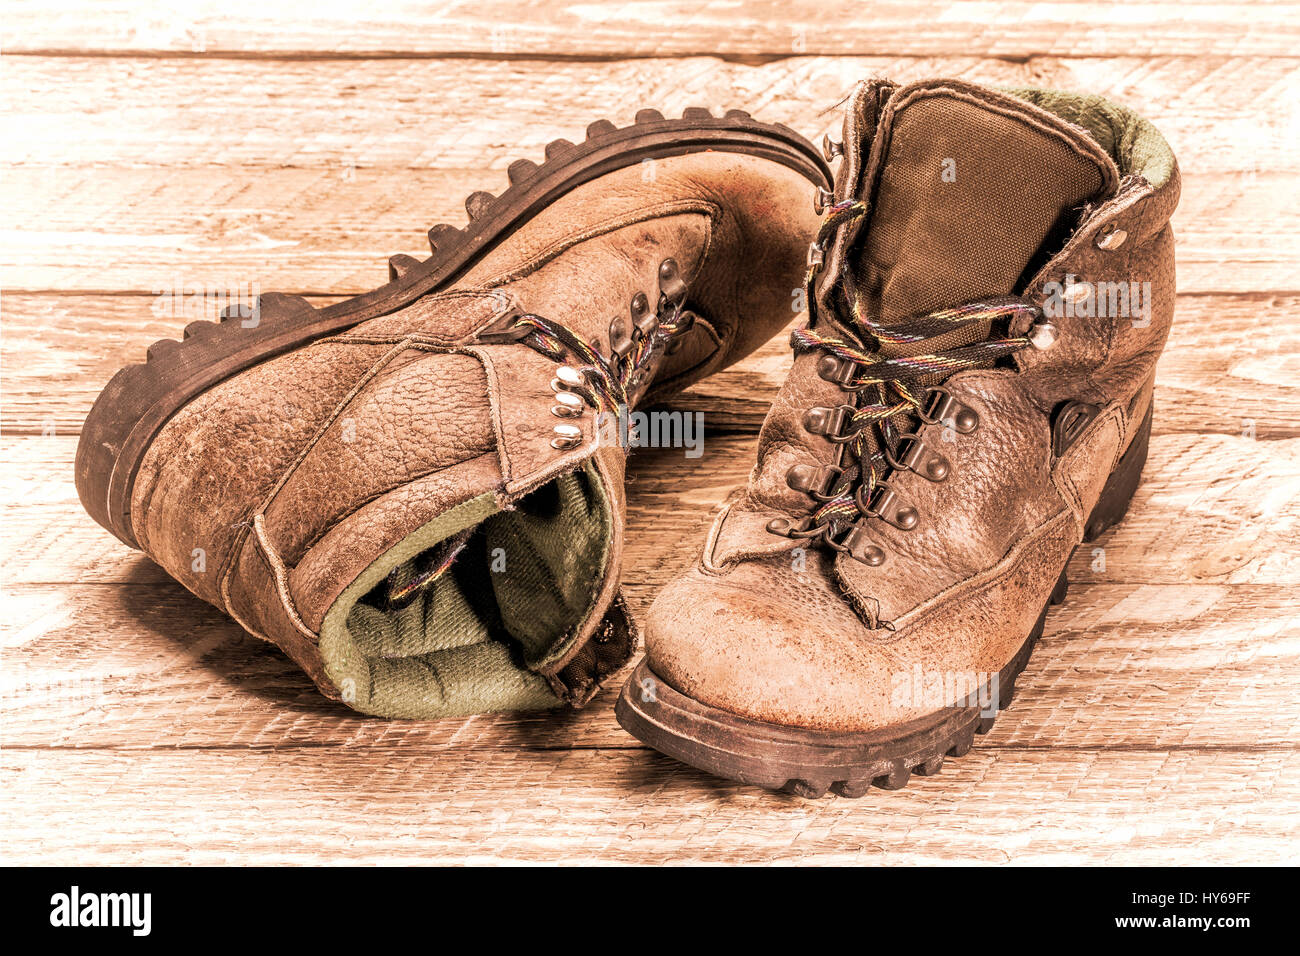 a pair of old, well-worn, hiking boots on weathered wood, retro sepia toning Stock Photo